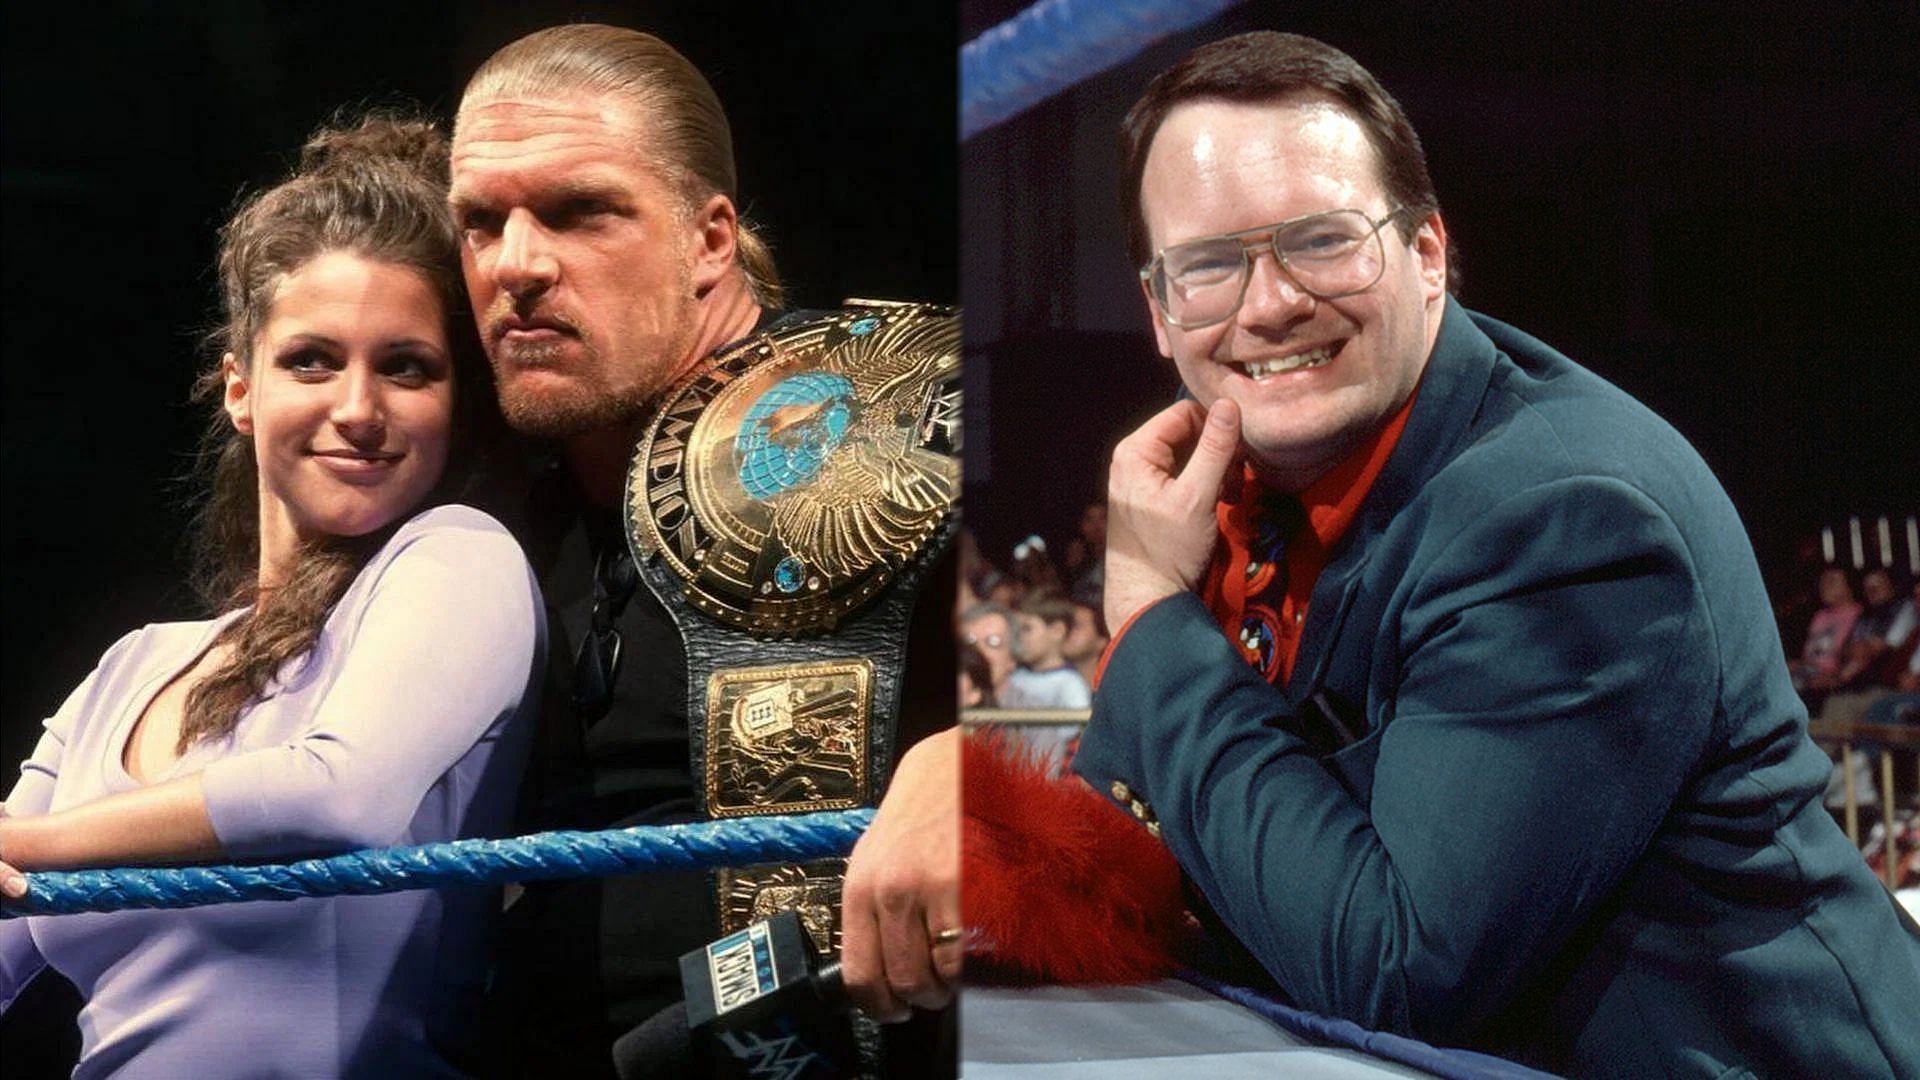 Jim Cornette comments on the possibility of WWE legend's son